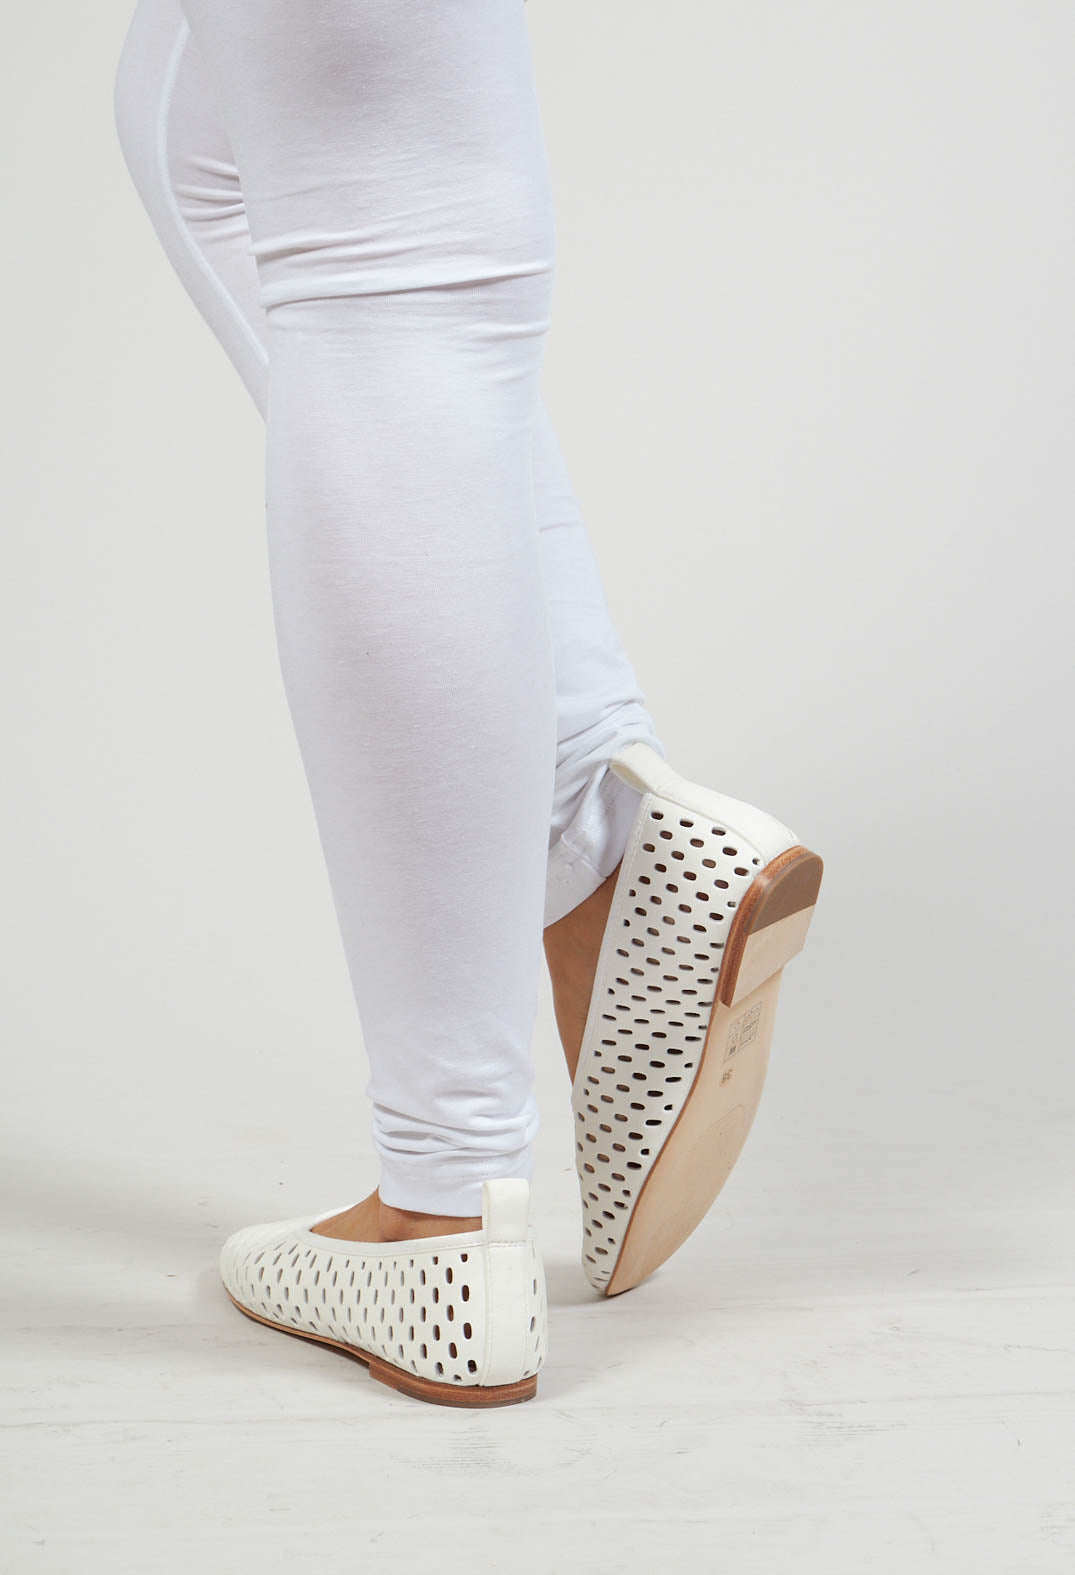 Net Style Cut Out Pumps in White